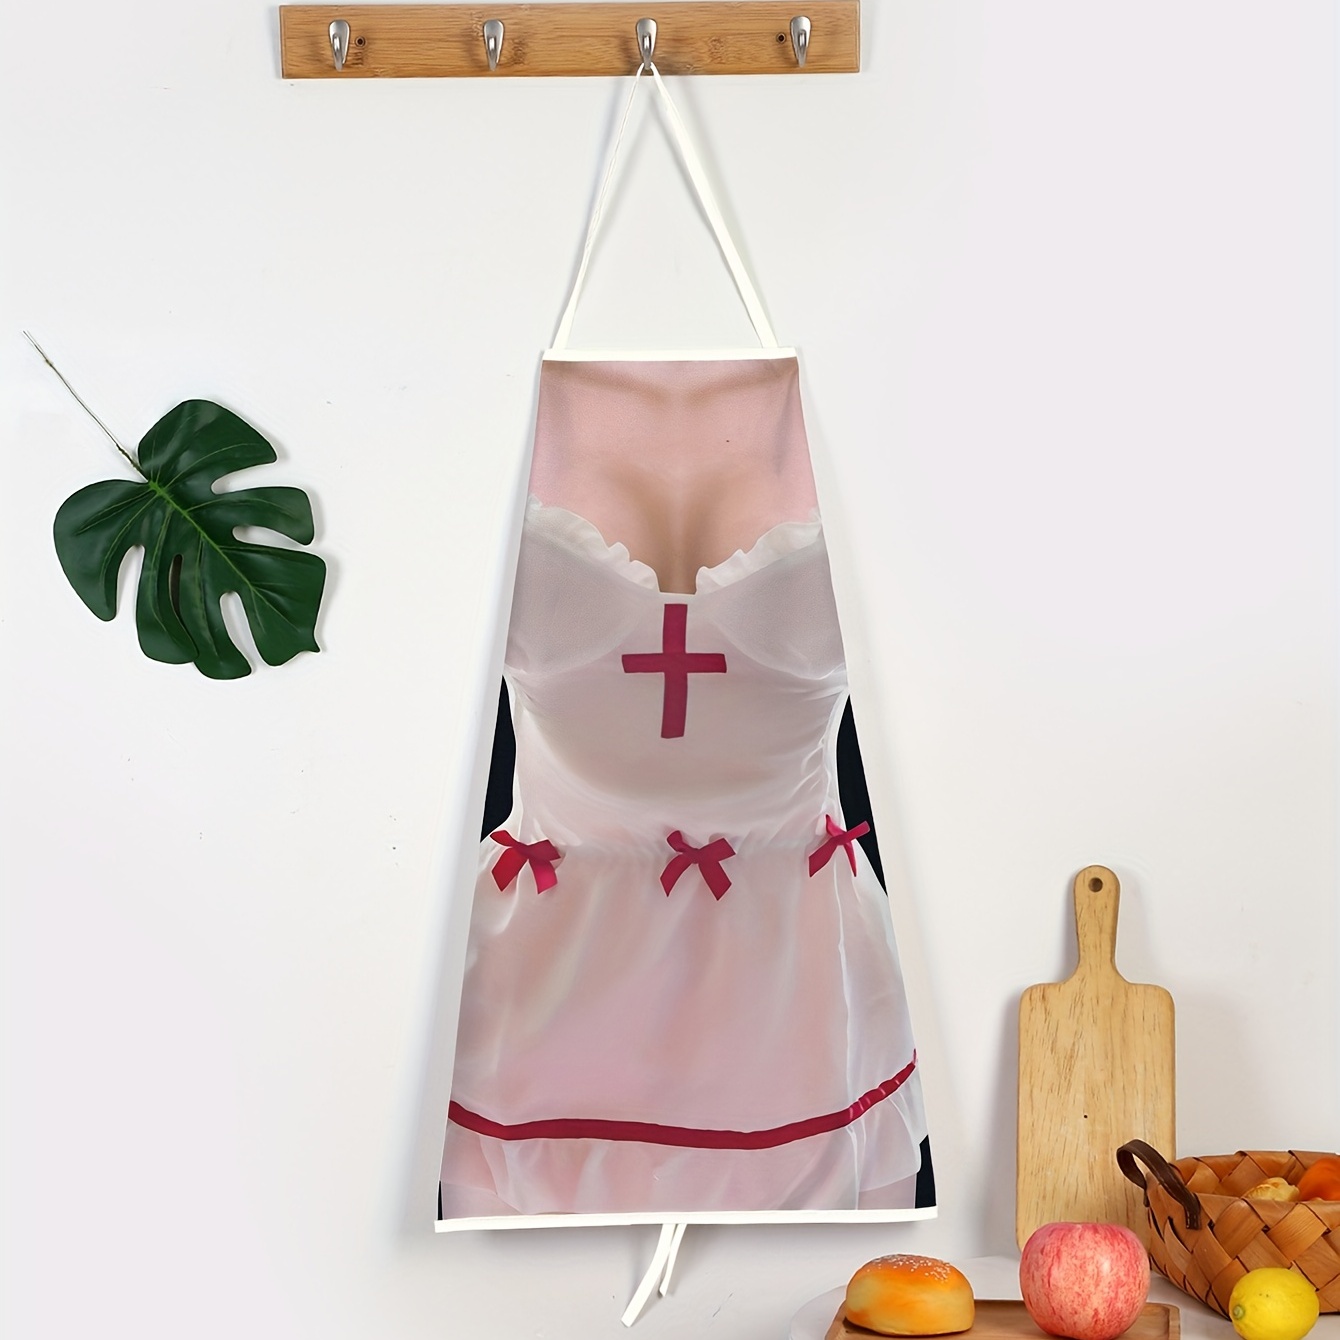 Cooking Aprons For Women - Funny Aprons For Women, Cooking Gifts